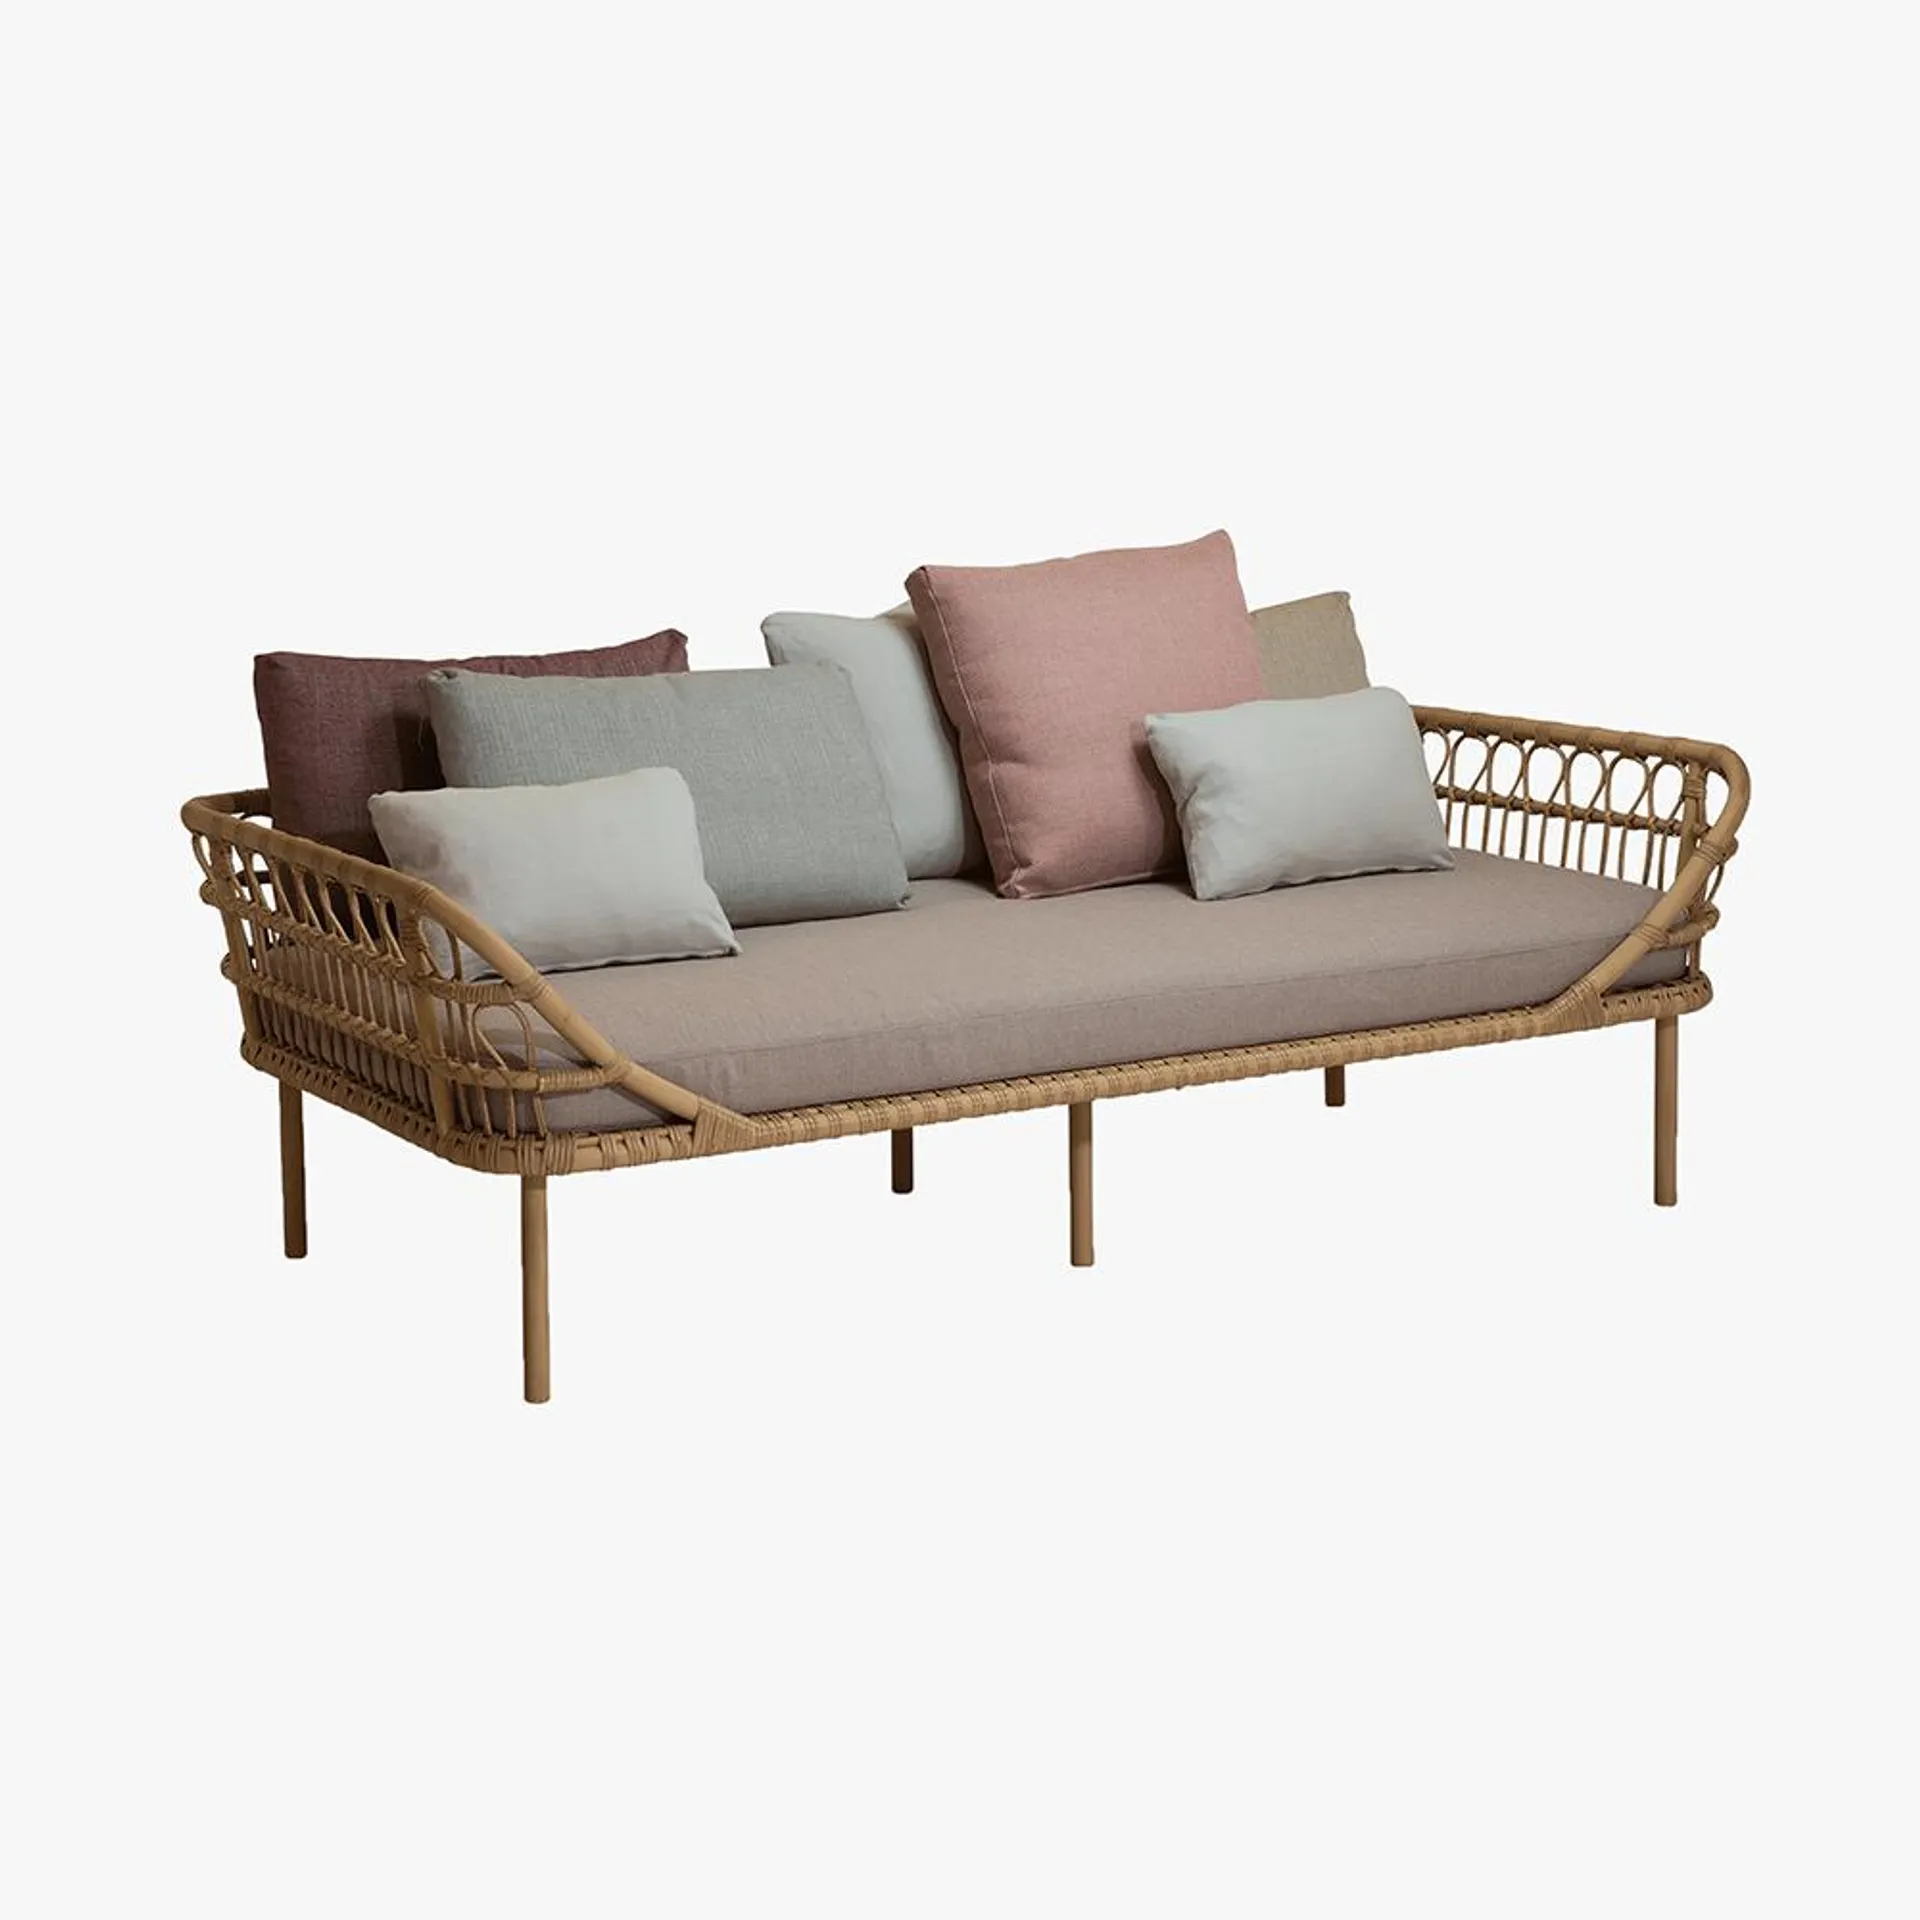 HELENA Daybed